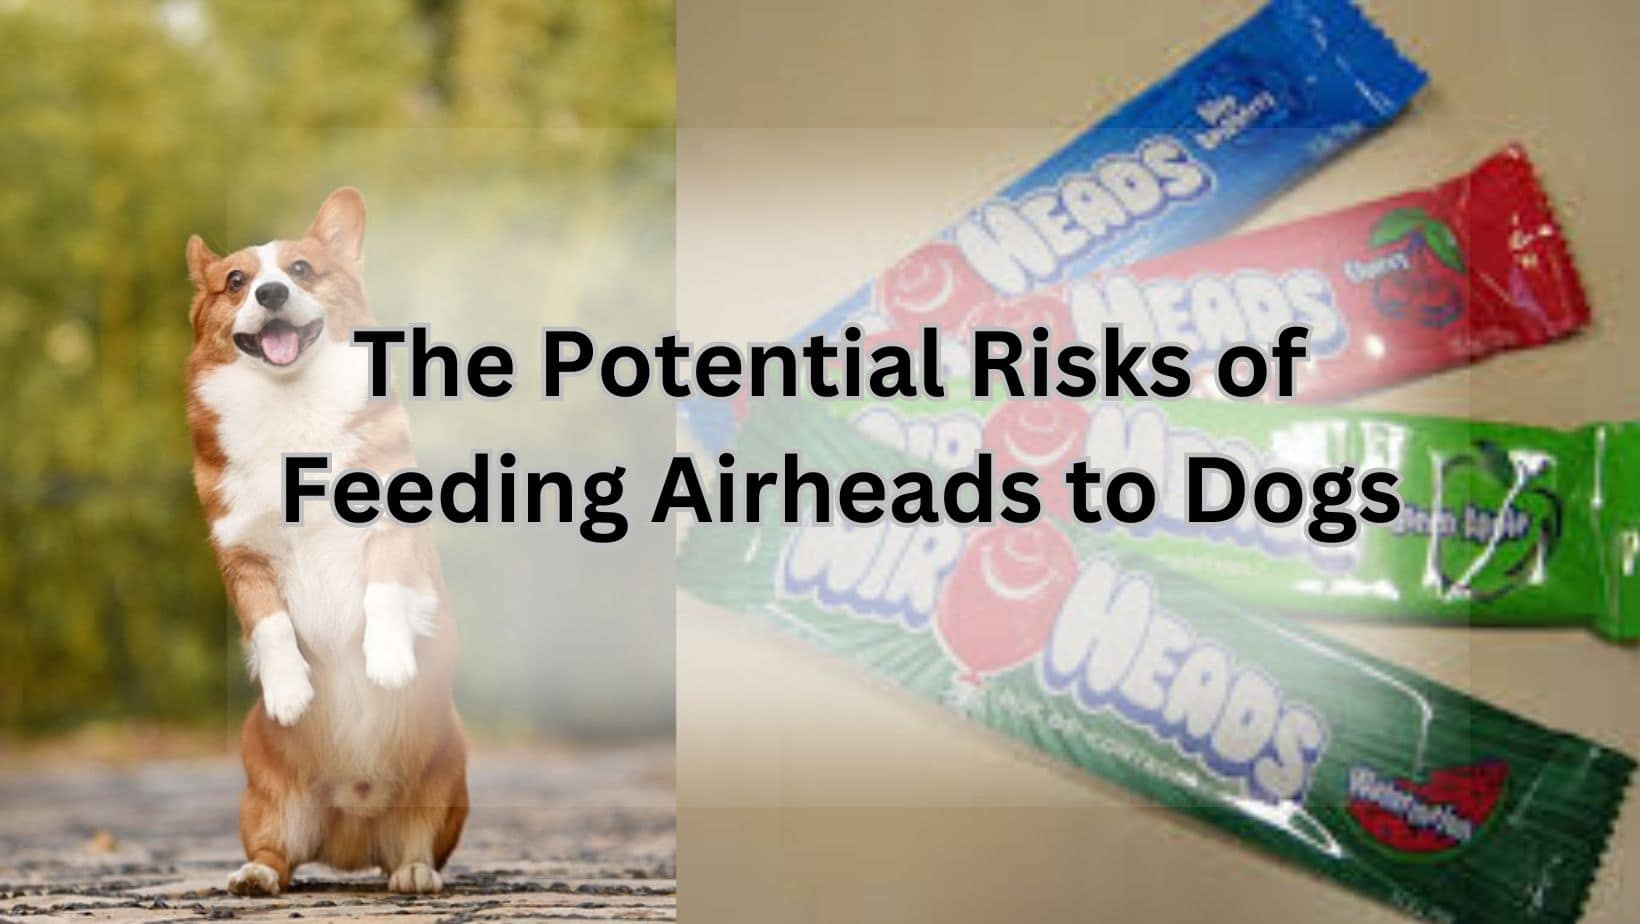 Airheads for dog